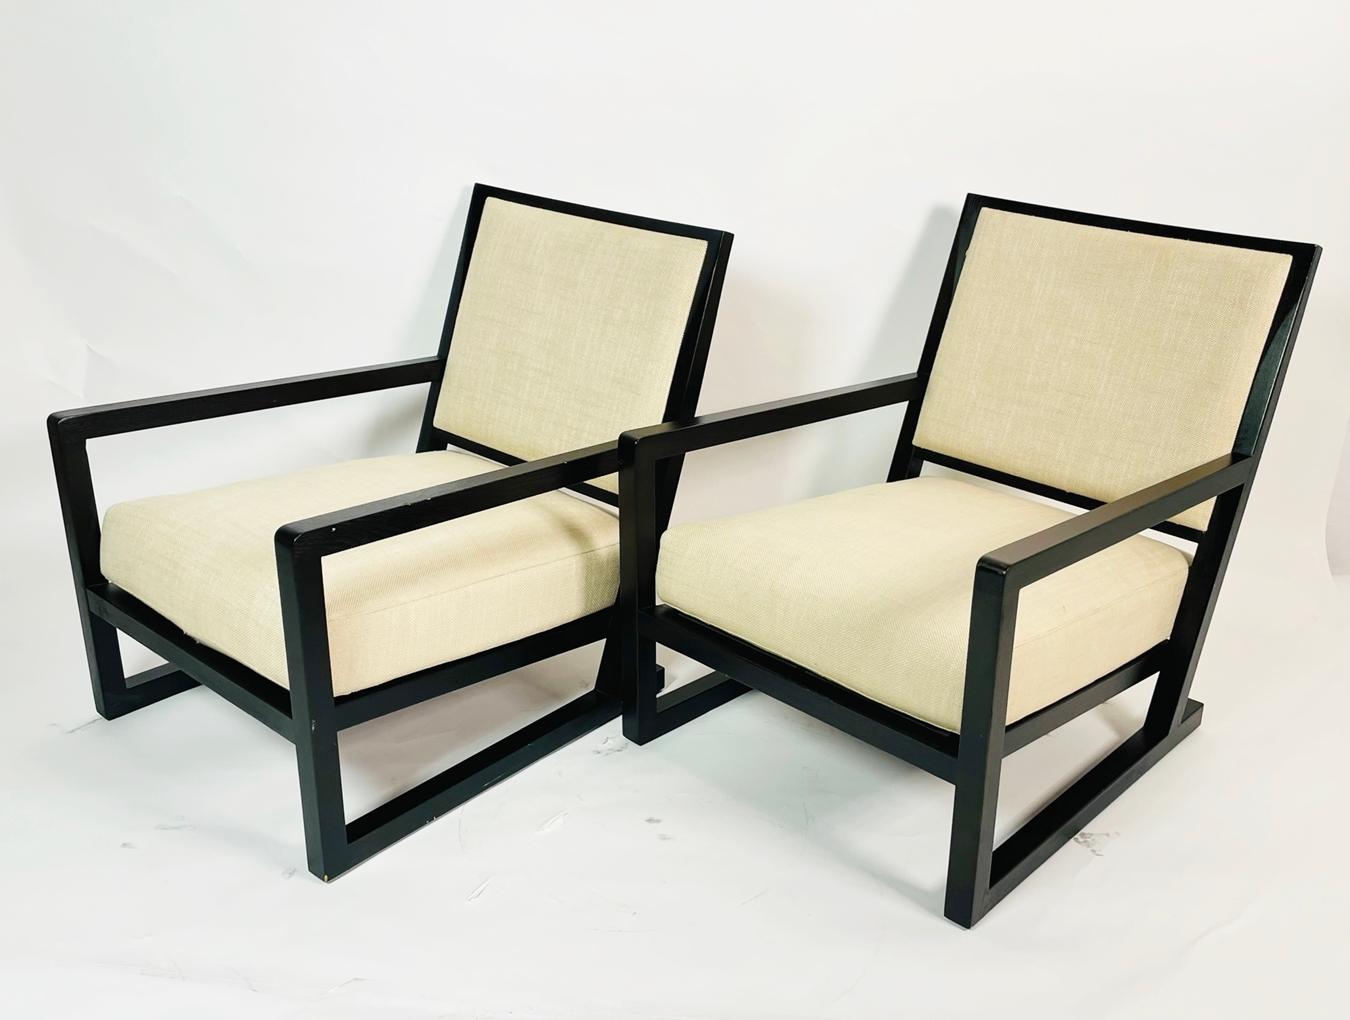 With sweeping curves, the Simon lounge chair features a simple, and effortless stance. The solid wood frame supports a down layered seat cushion.The chairs are generous in size and very comfortable.

Measurements:
30 inches high x 26 inches wide